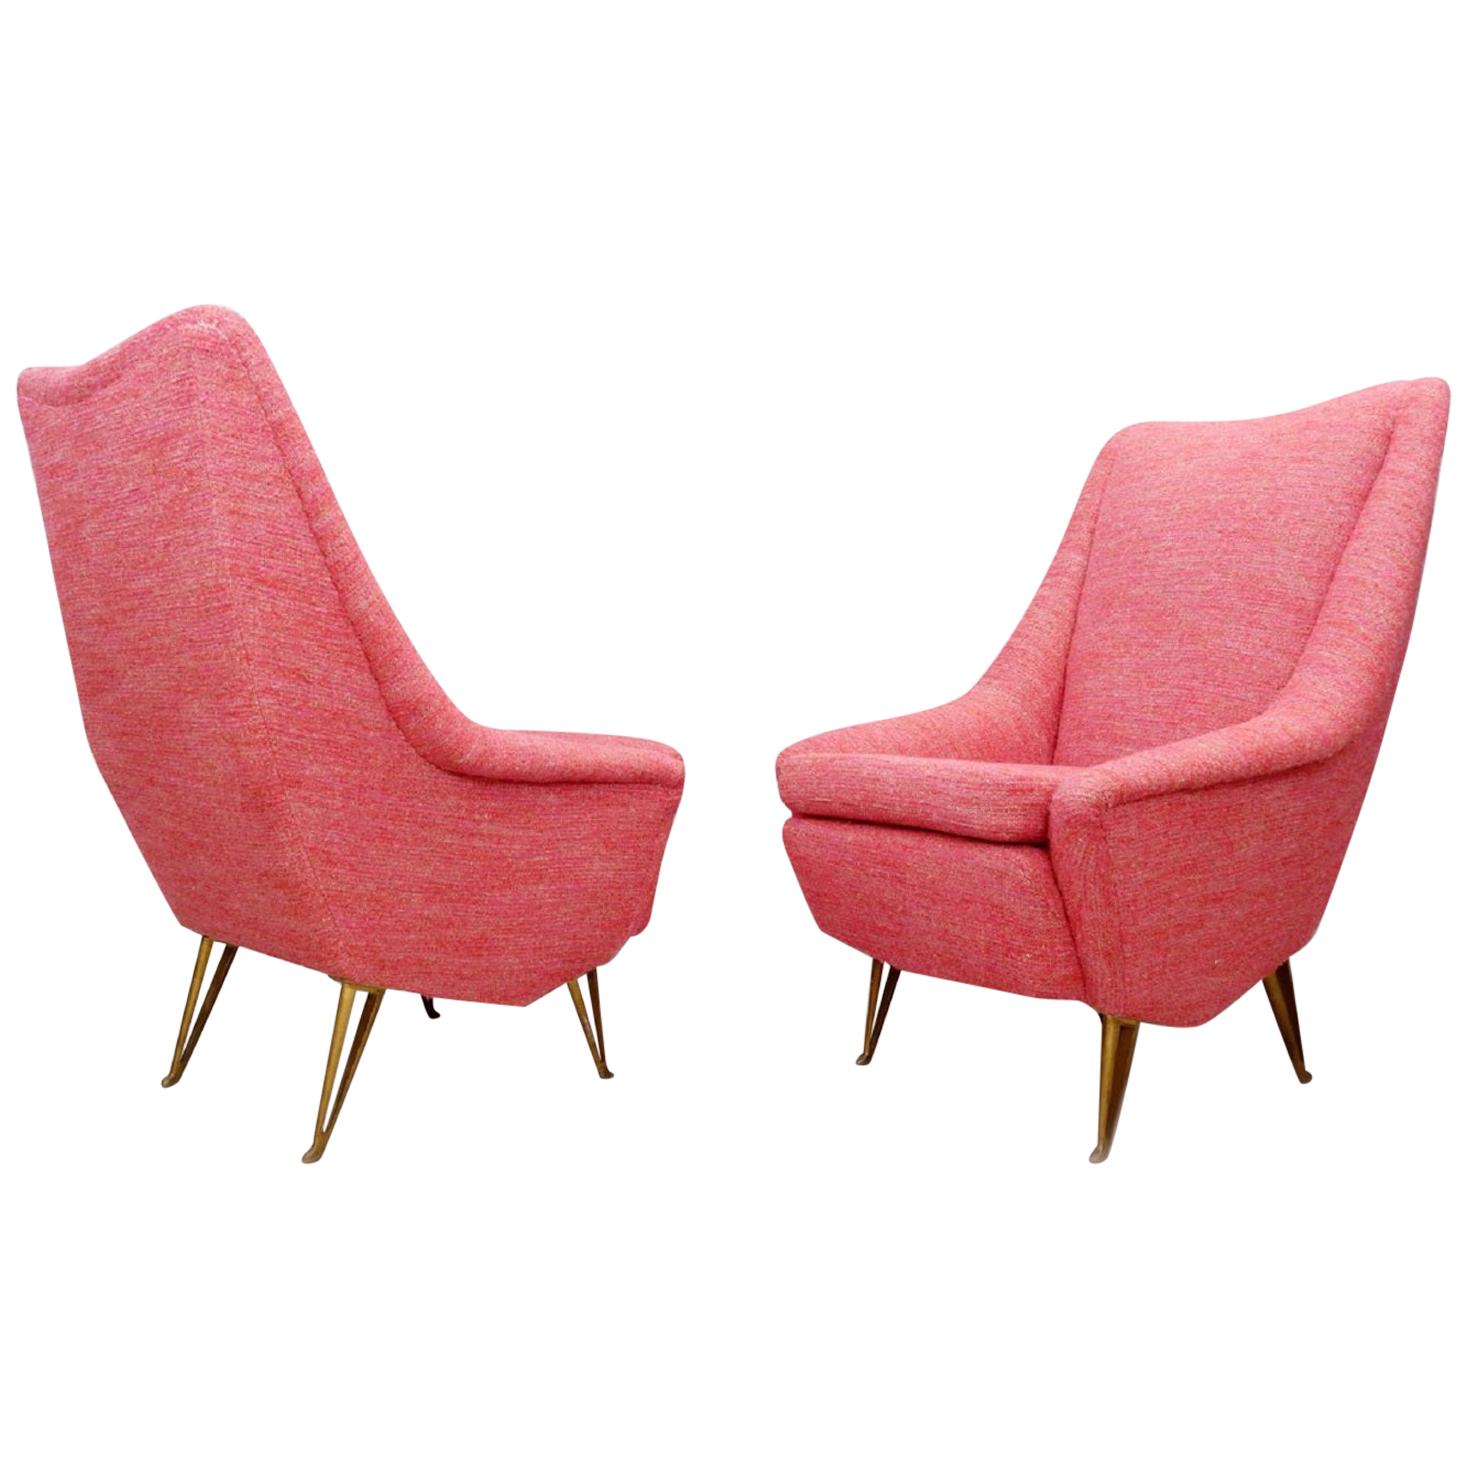 Pair of Italian Armchairs with High Backs, New Upholstery